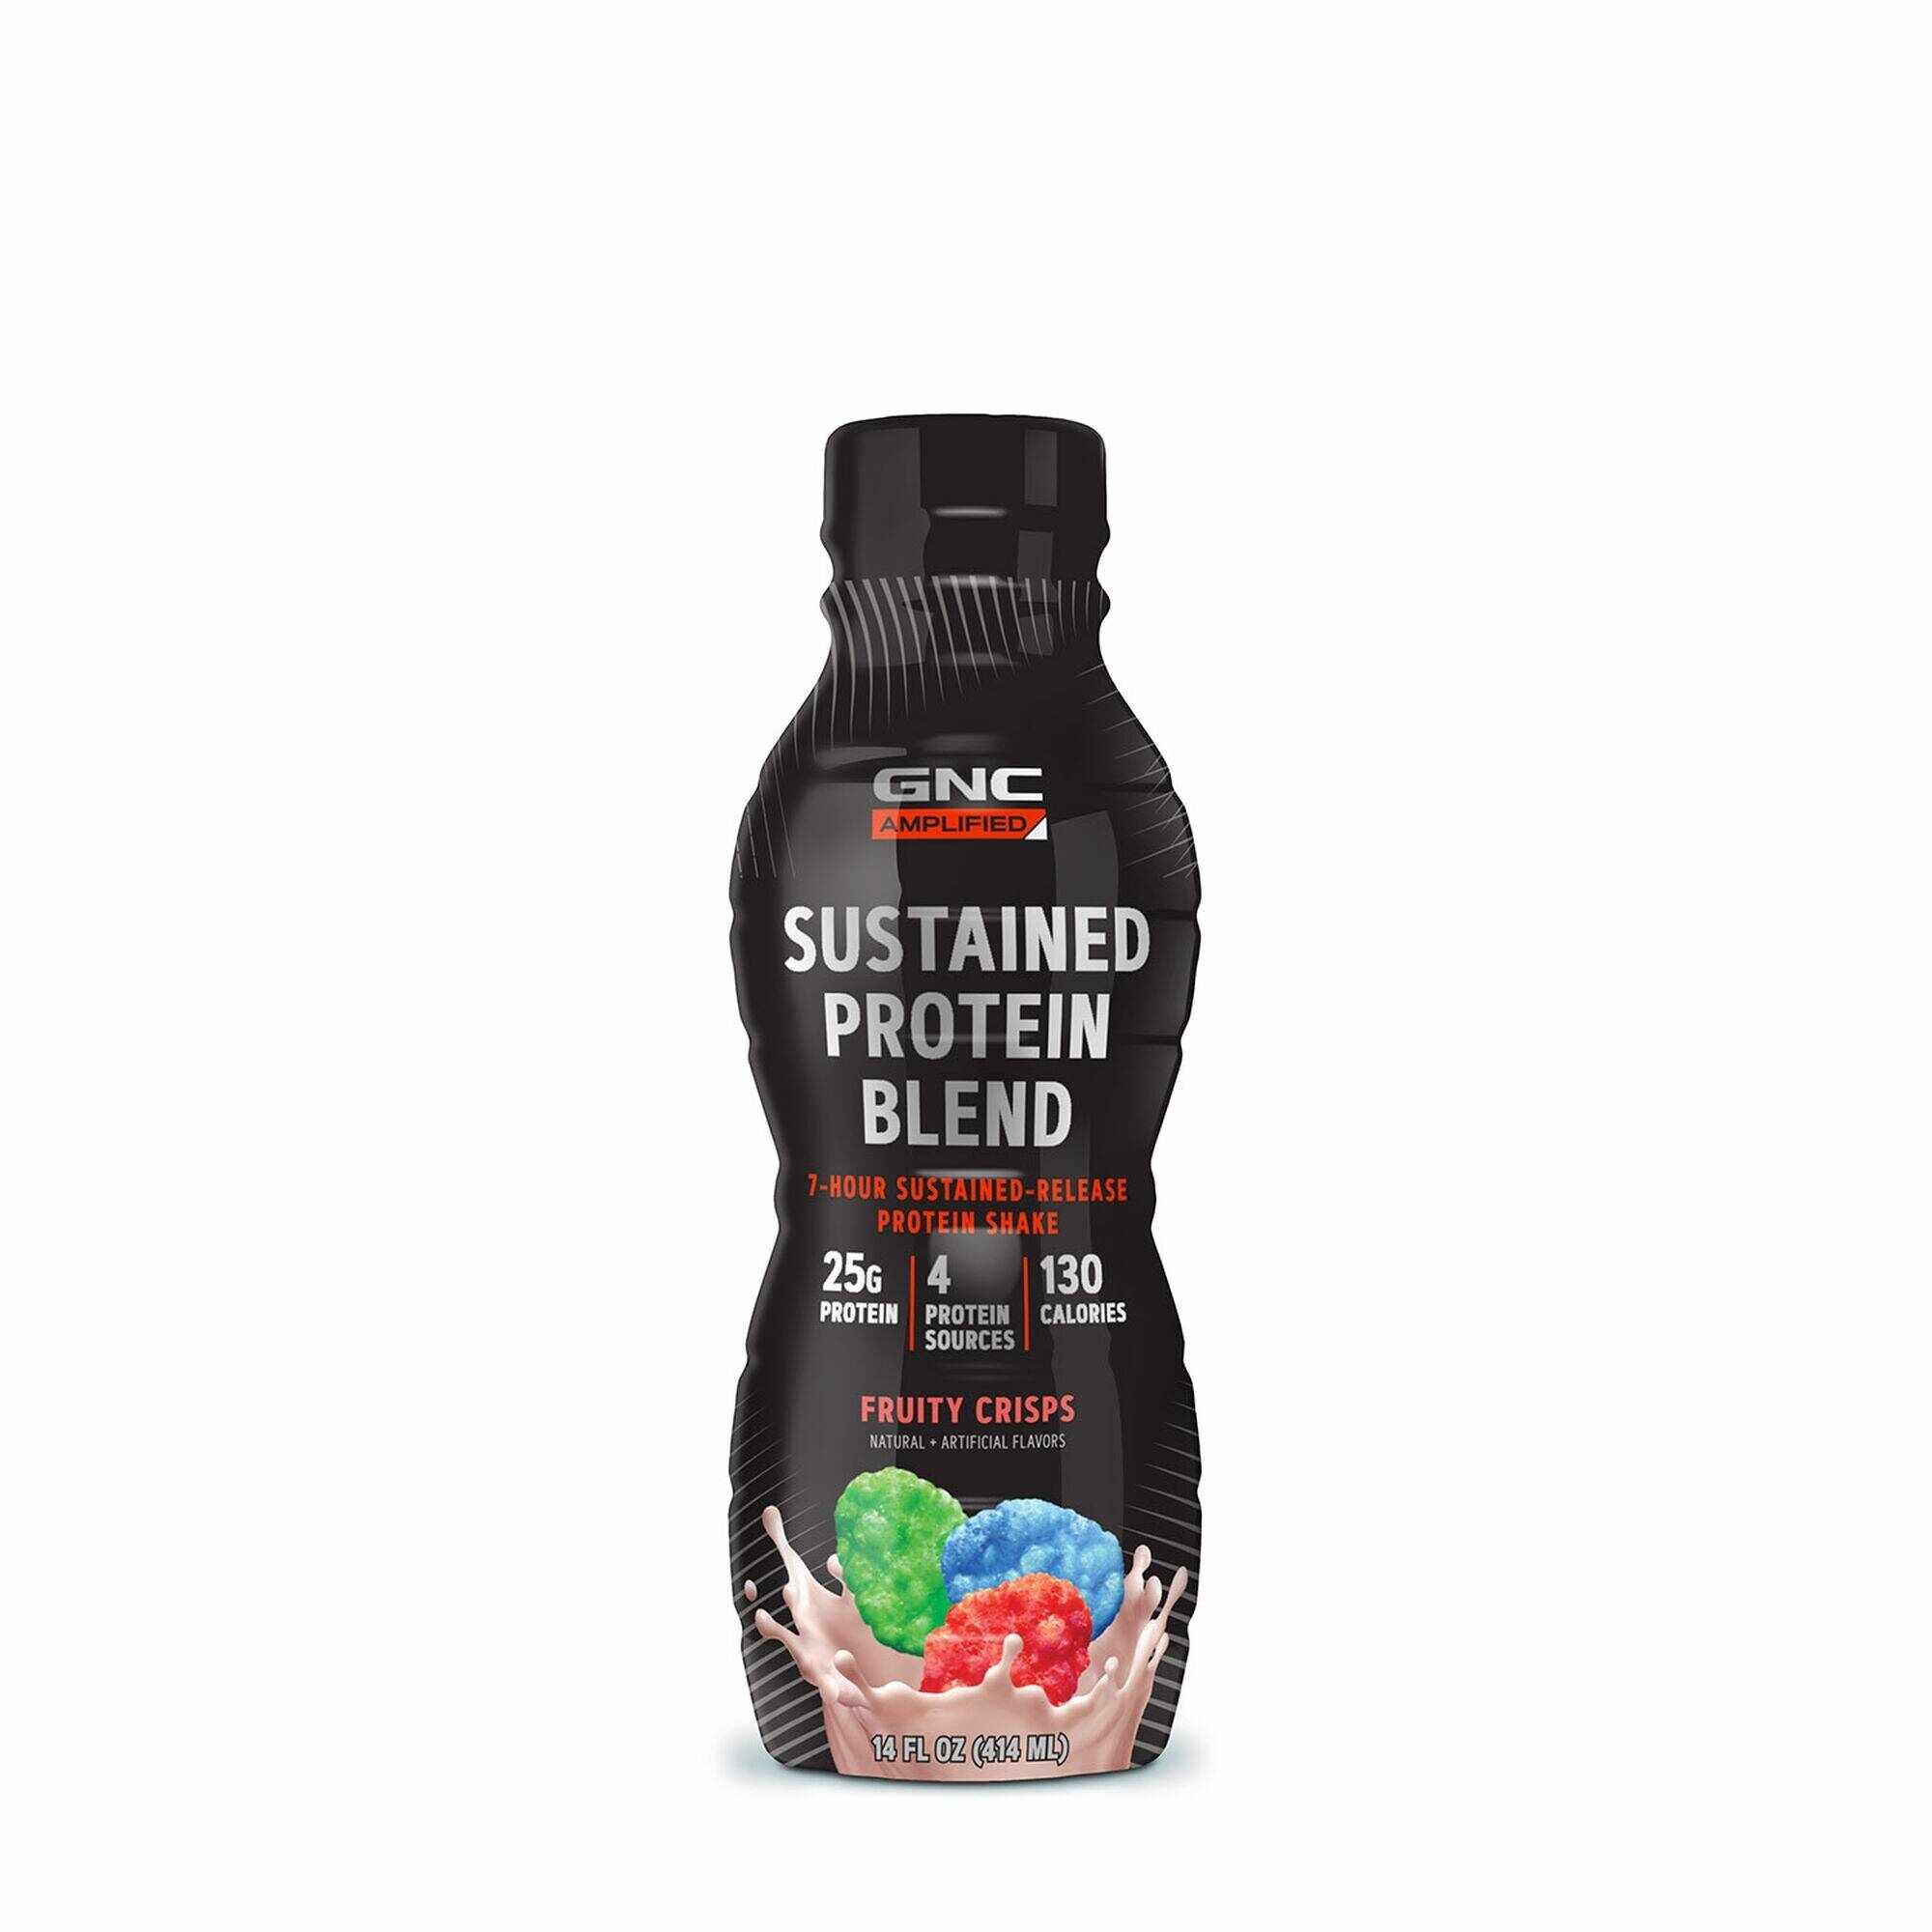 Sustained protein blend shake proteic rtd, cu aroma de cereale fructate, 414ml - Gnc